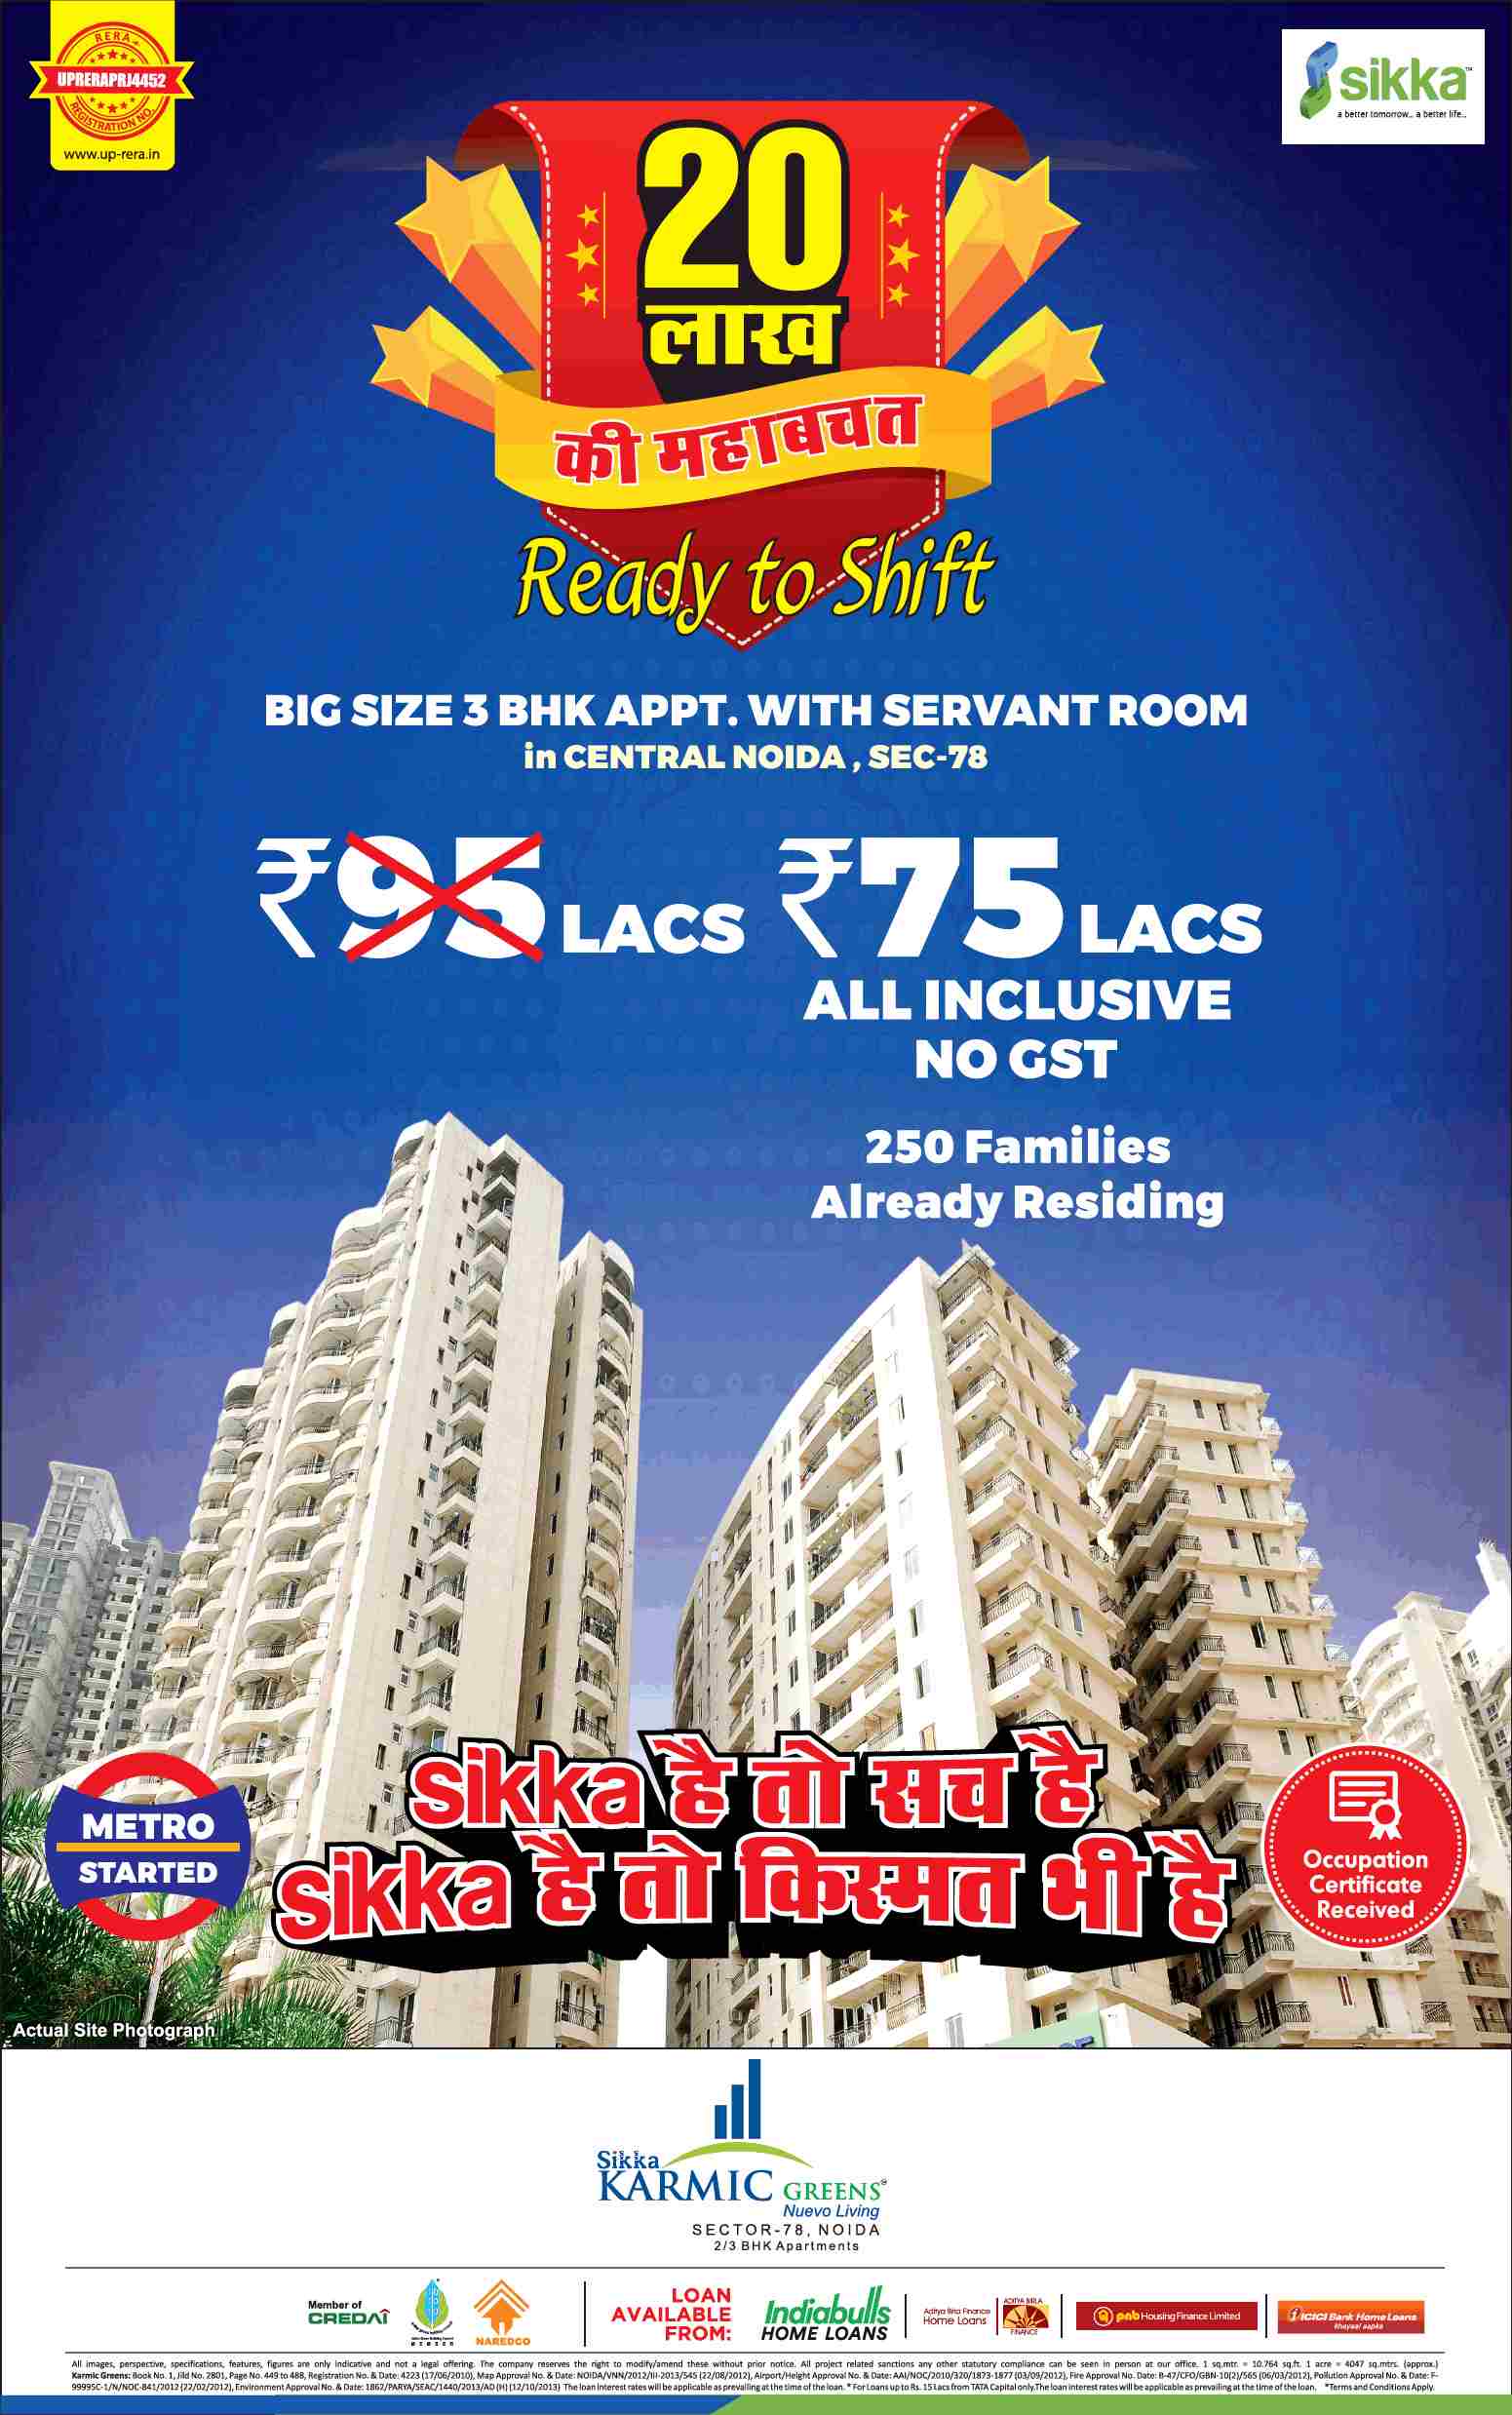 Book 3 BHK apartment with servant room @ Rs. 75 Lacs at Sikka Karmic Greens in Noida Update